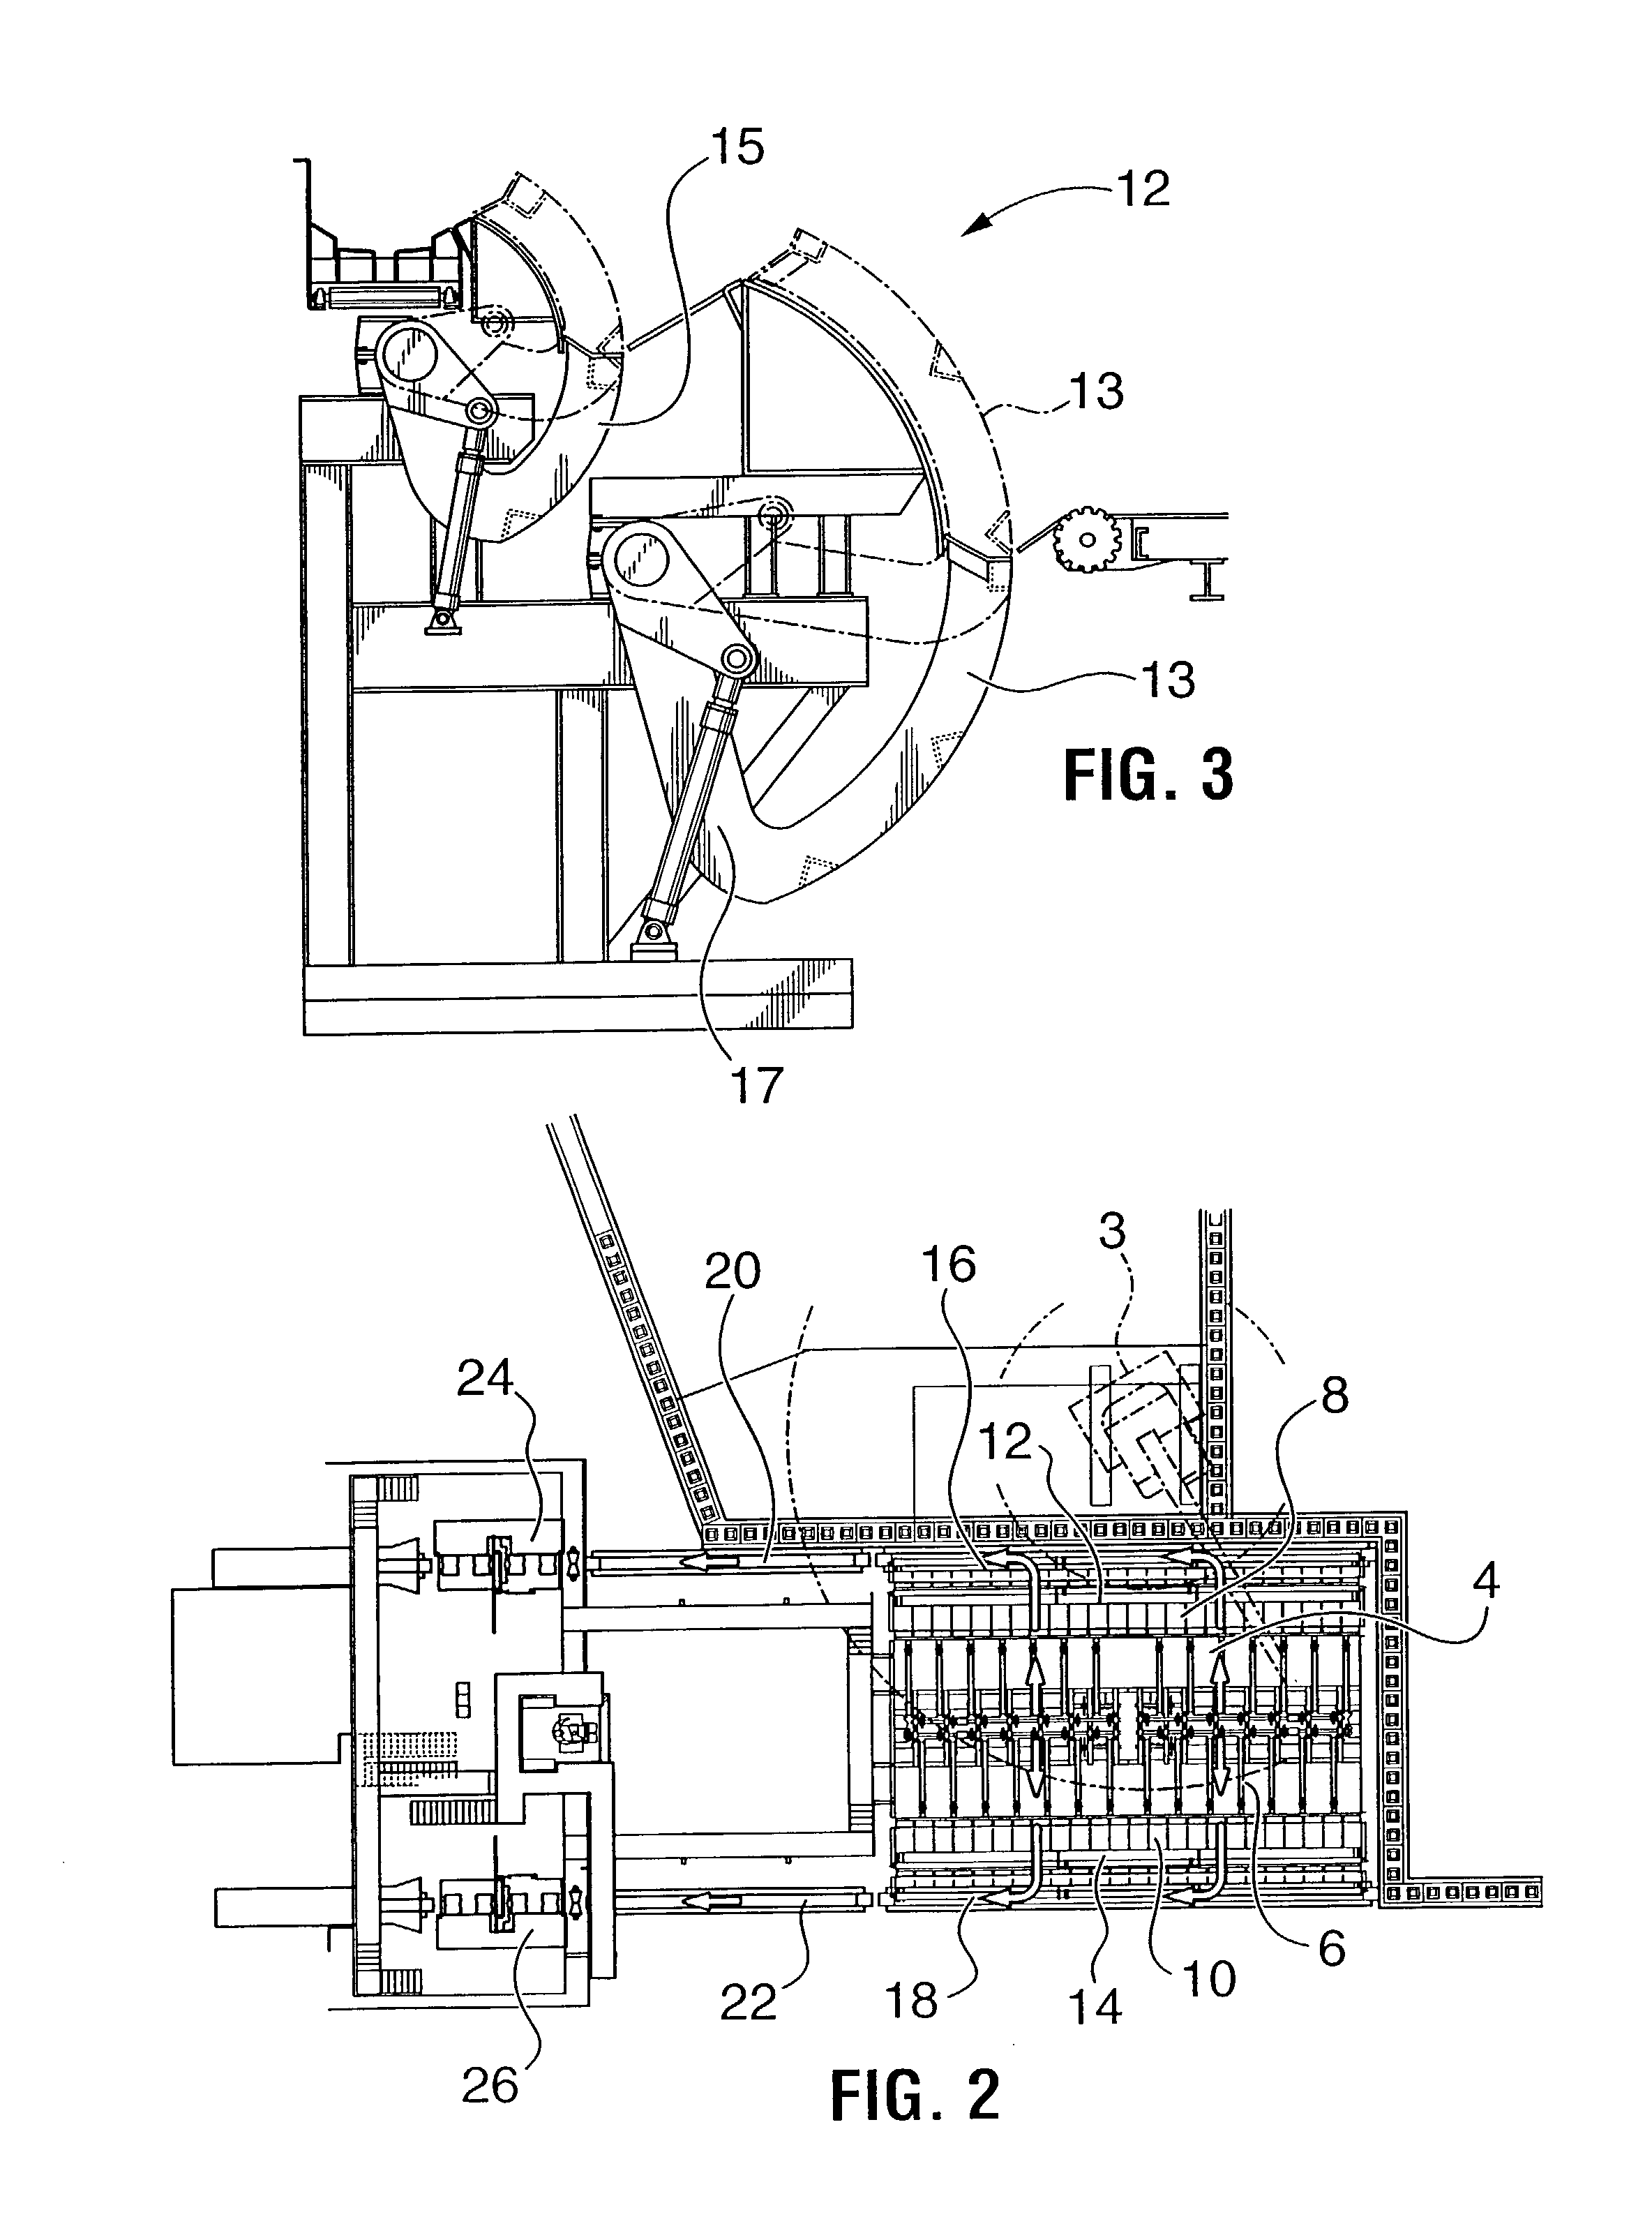 Method and apparatus for singulating, debarking, scanning and automatically sawing and sorting logs into lengths